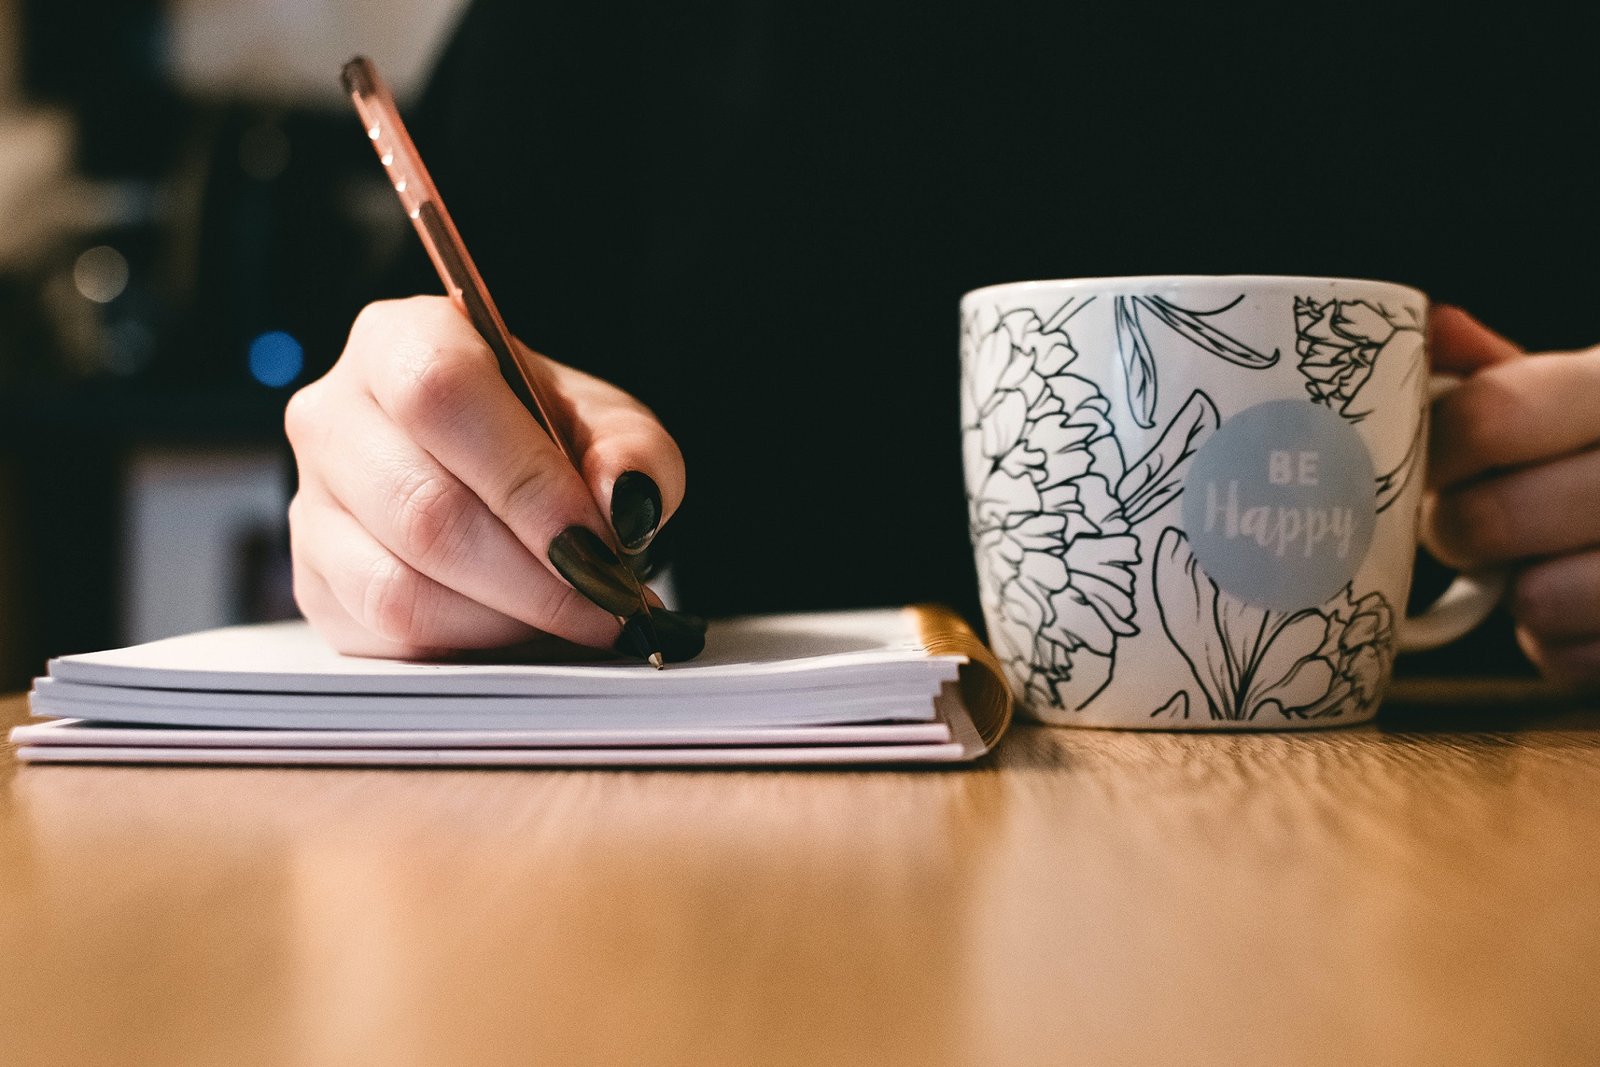 A white person's hand with black nails writes in an open journal with a pen. Next to them is a floral mug.